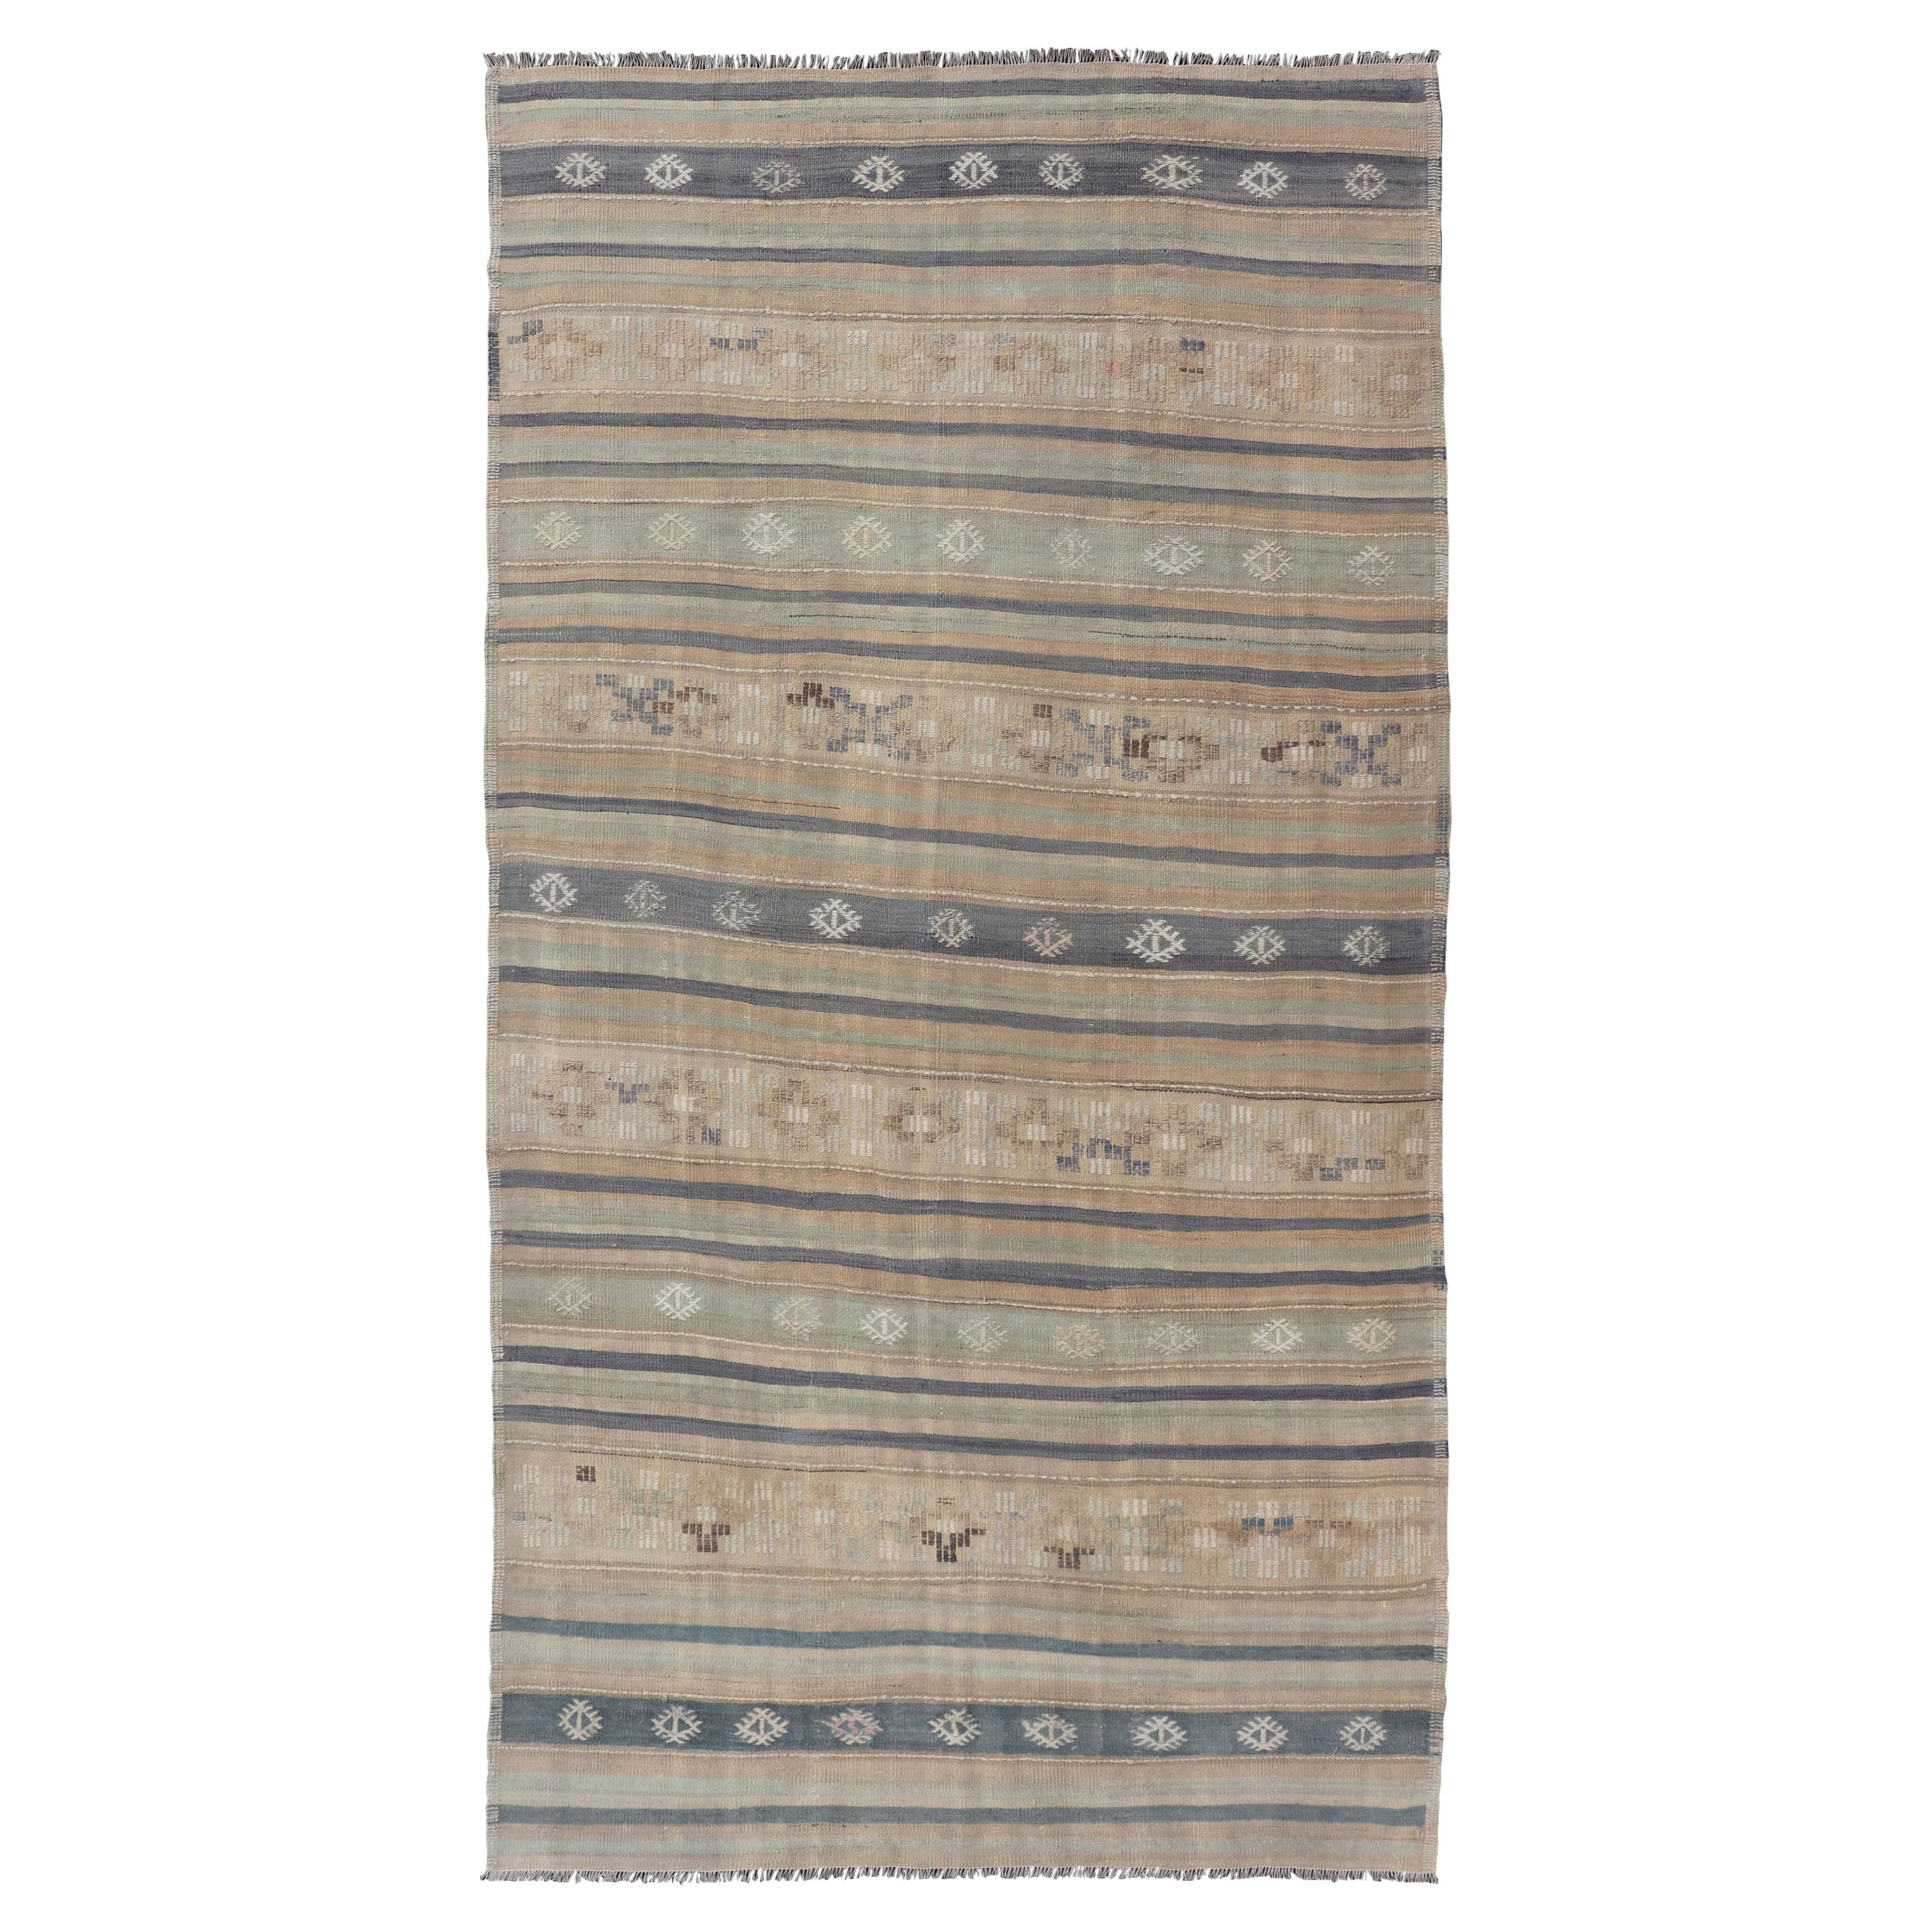 Vintage Hand Woven Turkish Kilim with Stripes in Light Taupe and Neutral Colors For Sale